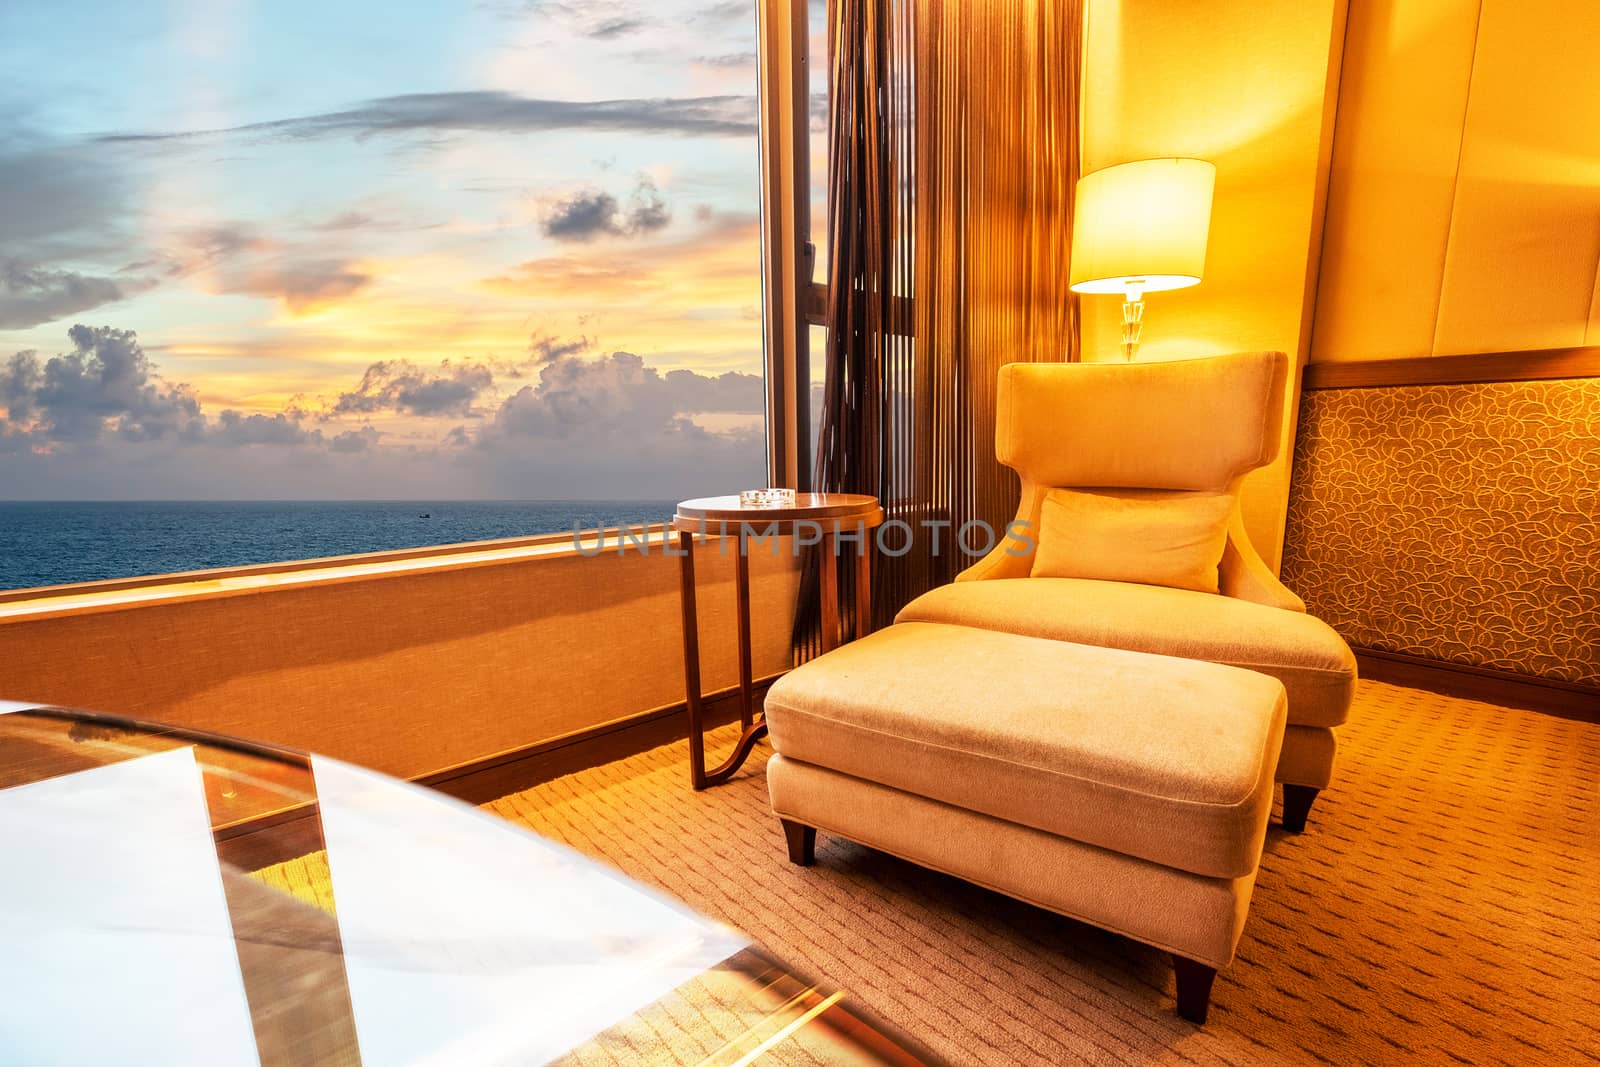 Sofa in living room in sunset at sea background 